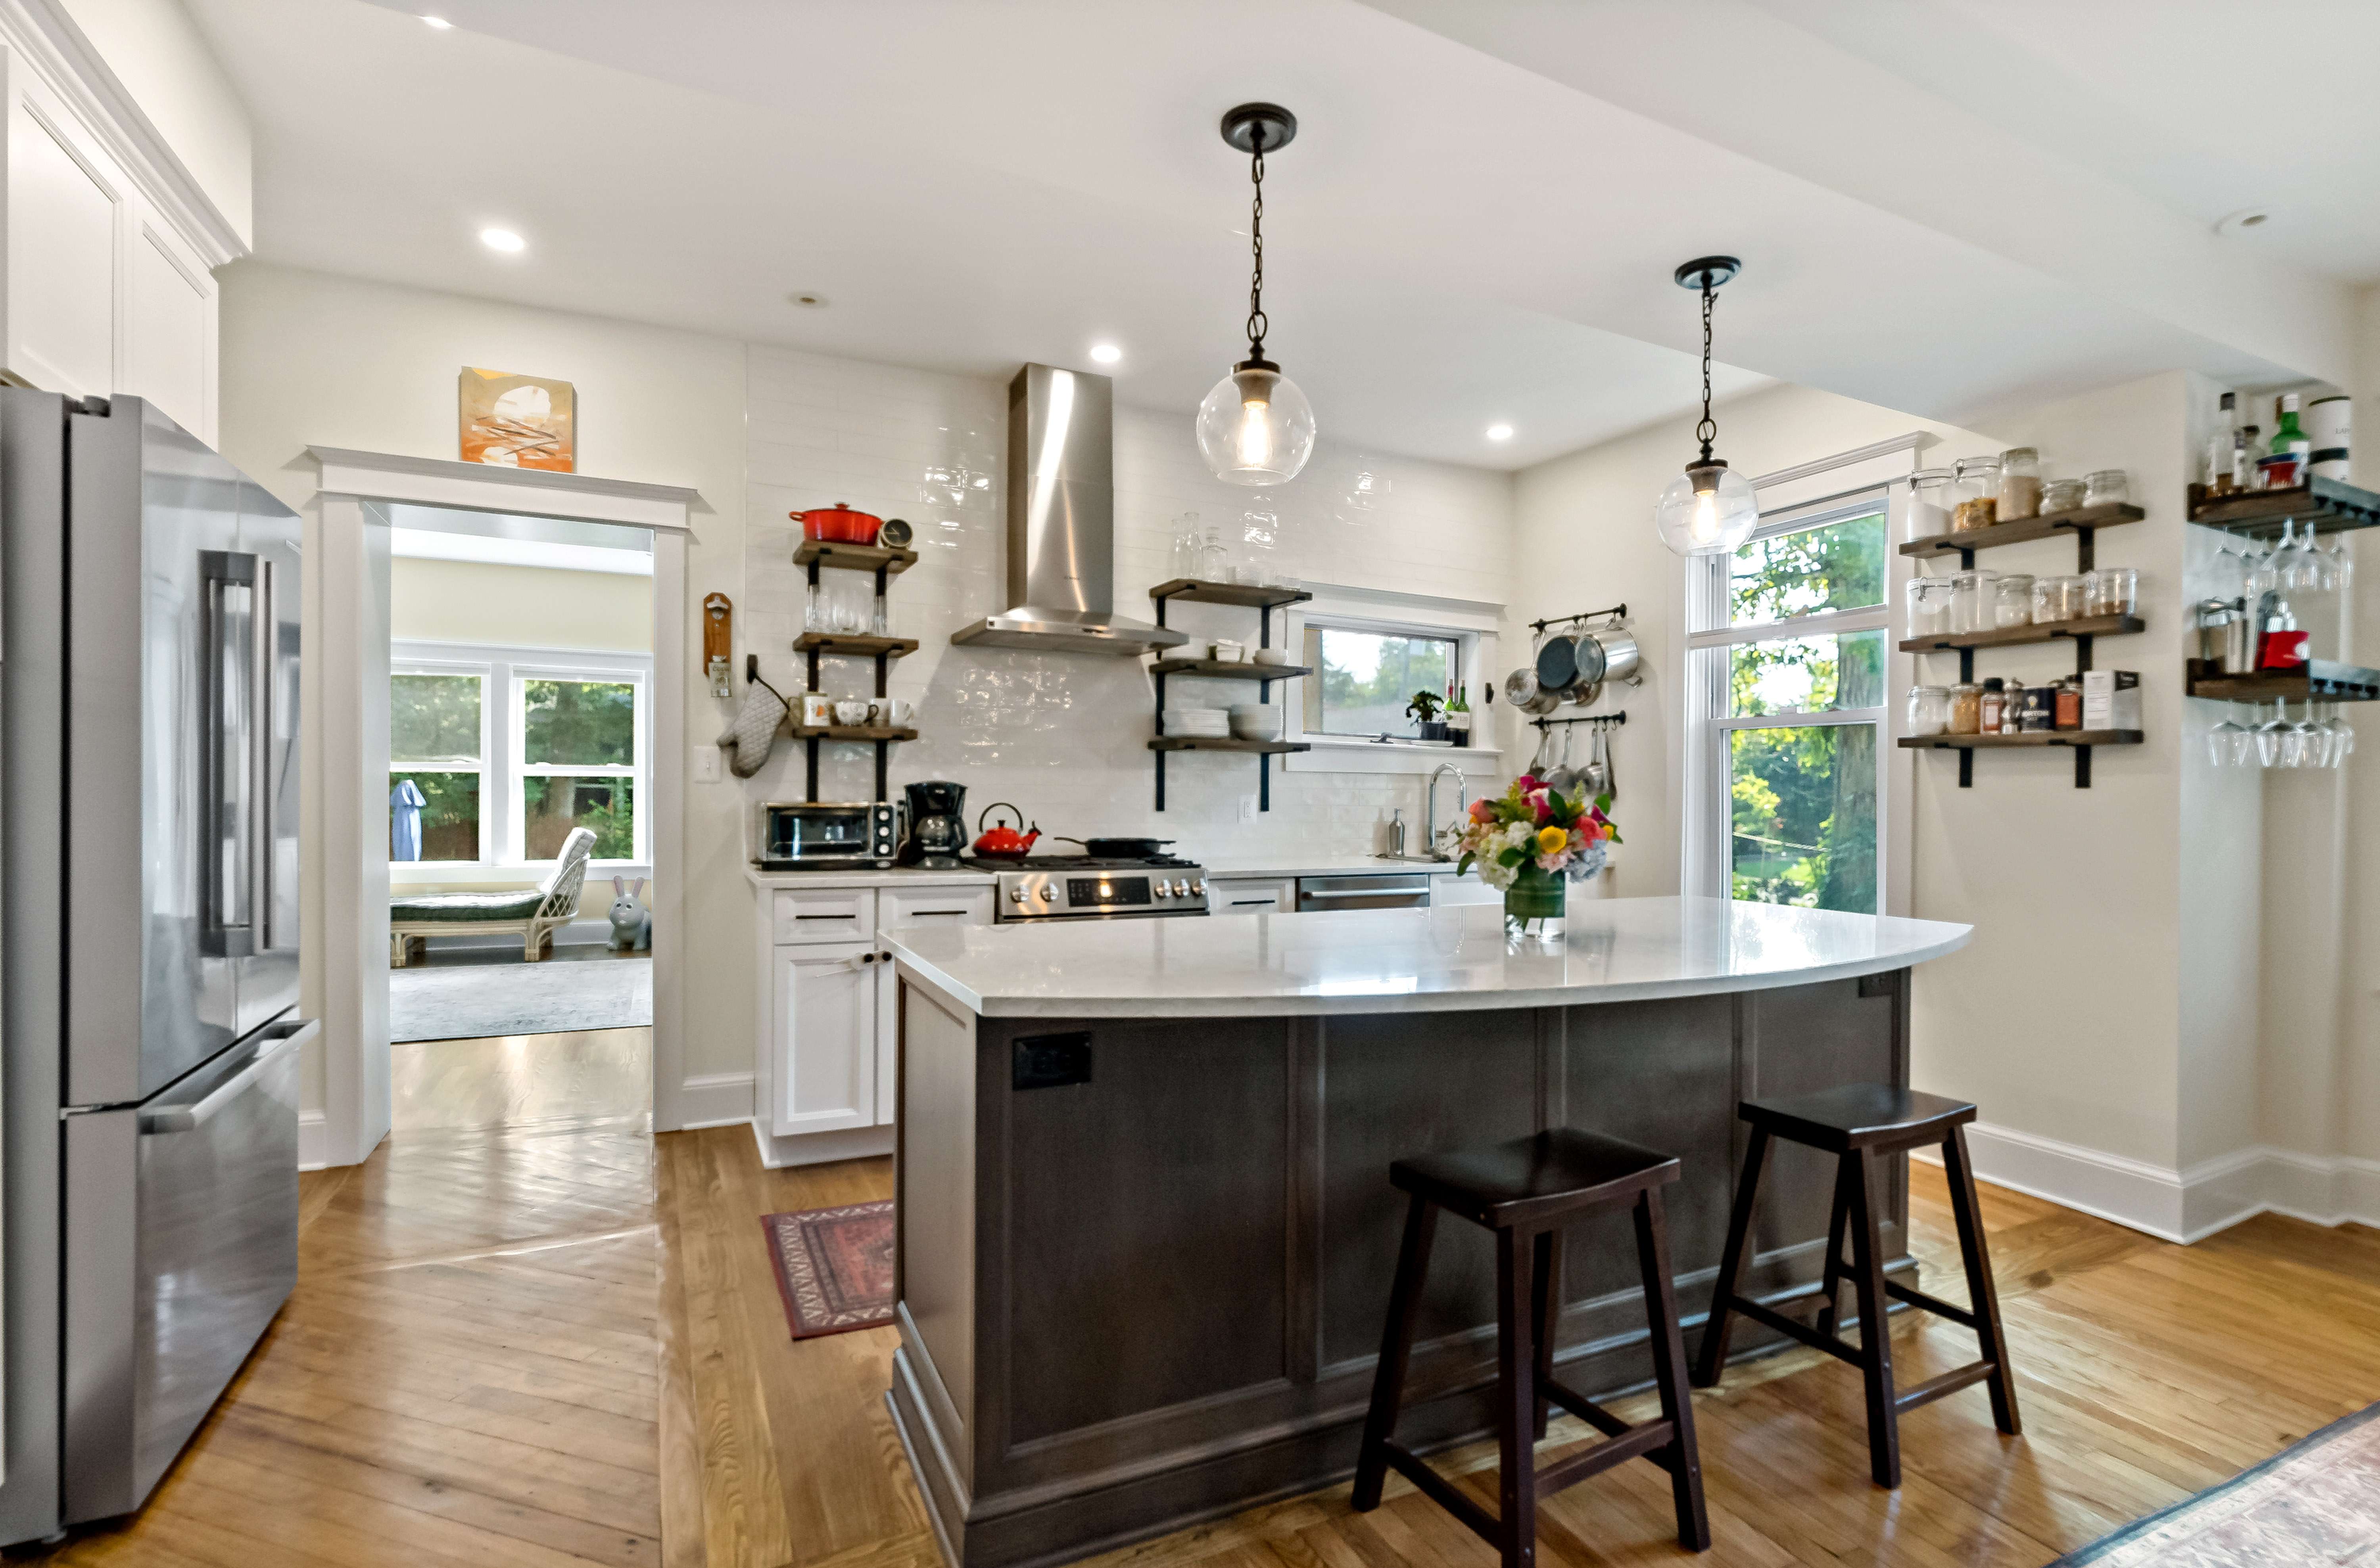 Arlington kitchen remodel with island and pendant lighting